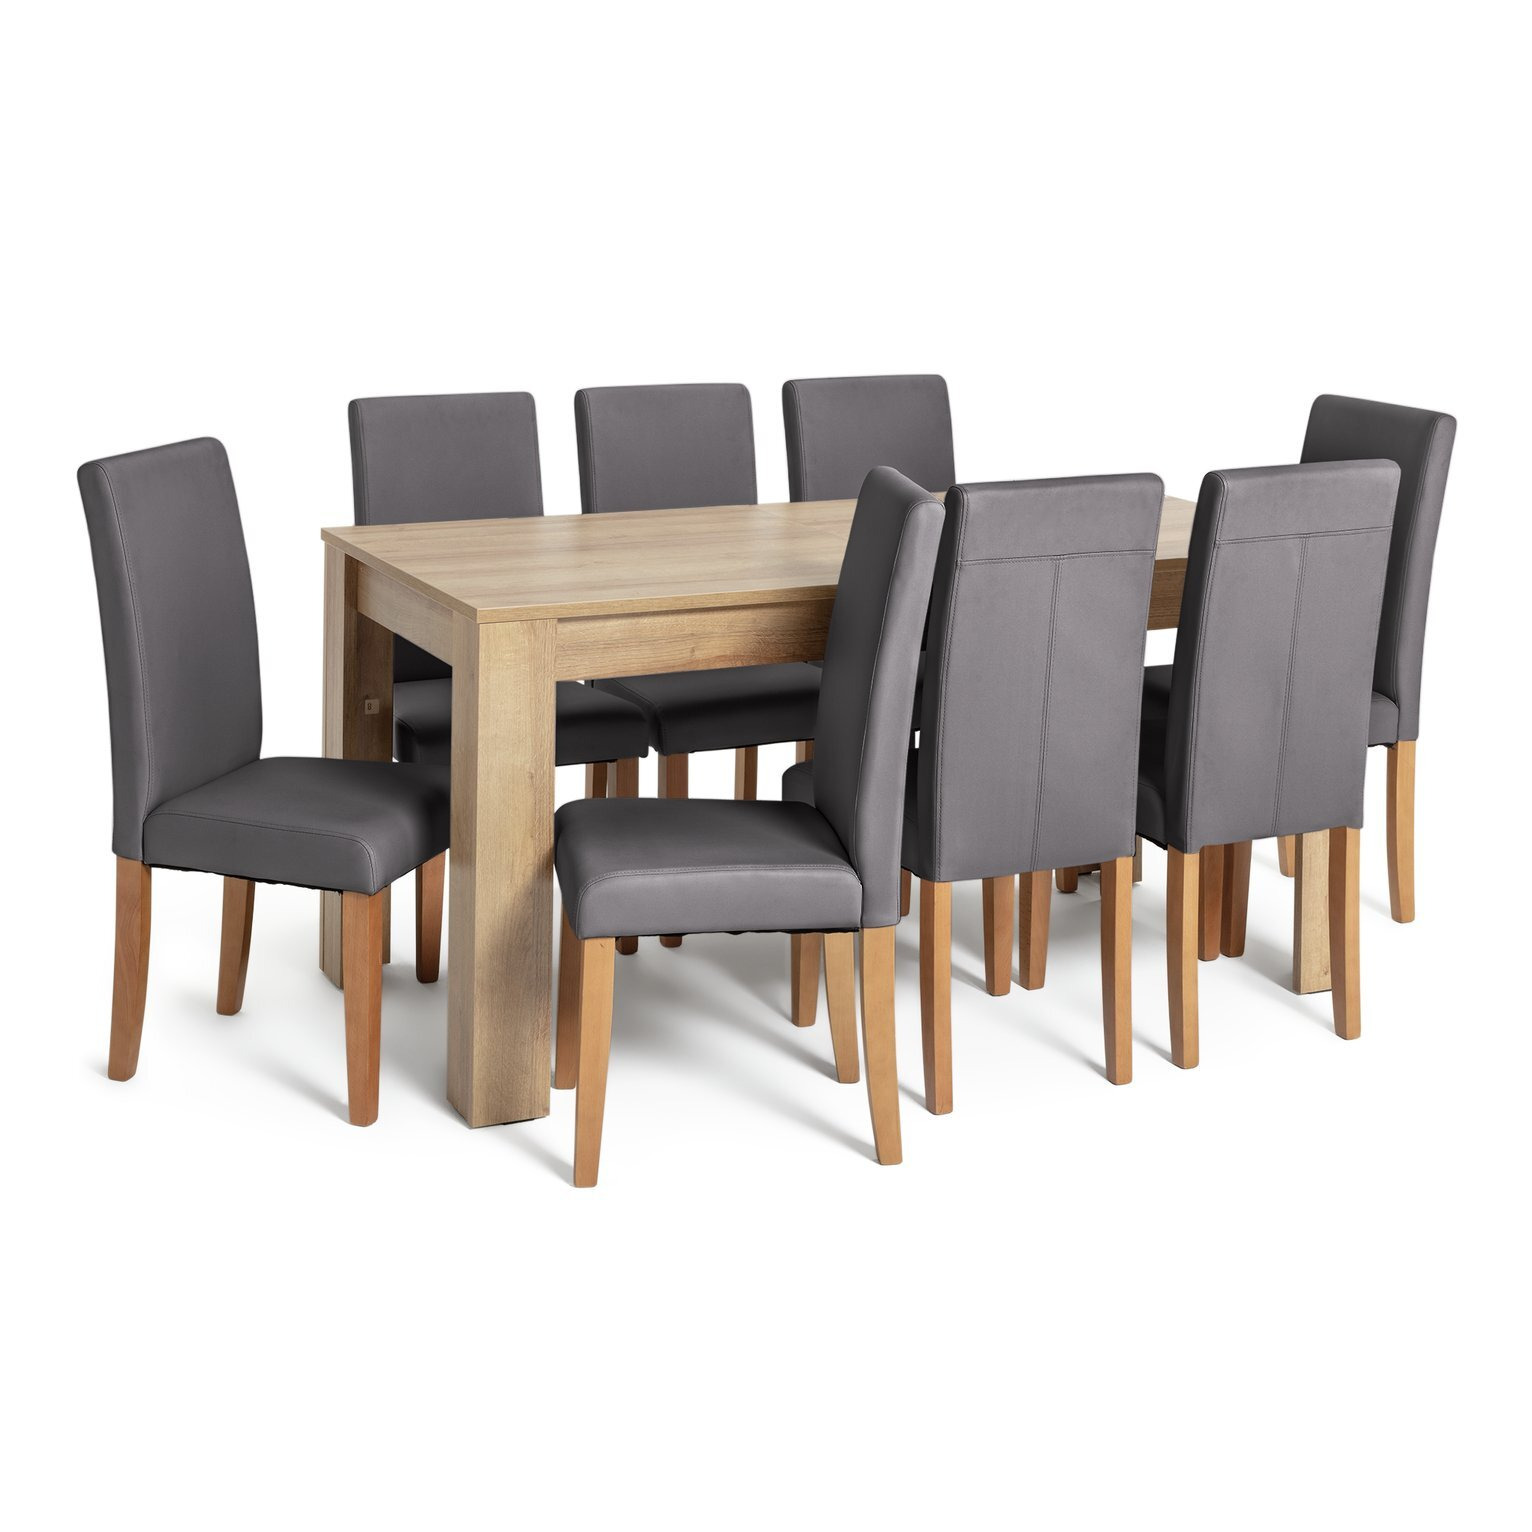 Argos Home Miami XL Extending Table & 8 Charcoal Chairs - image 1